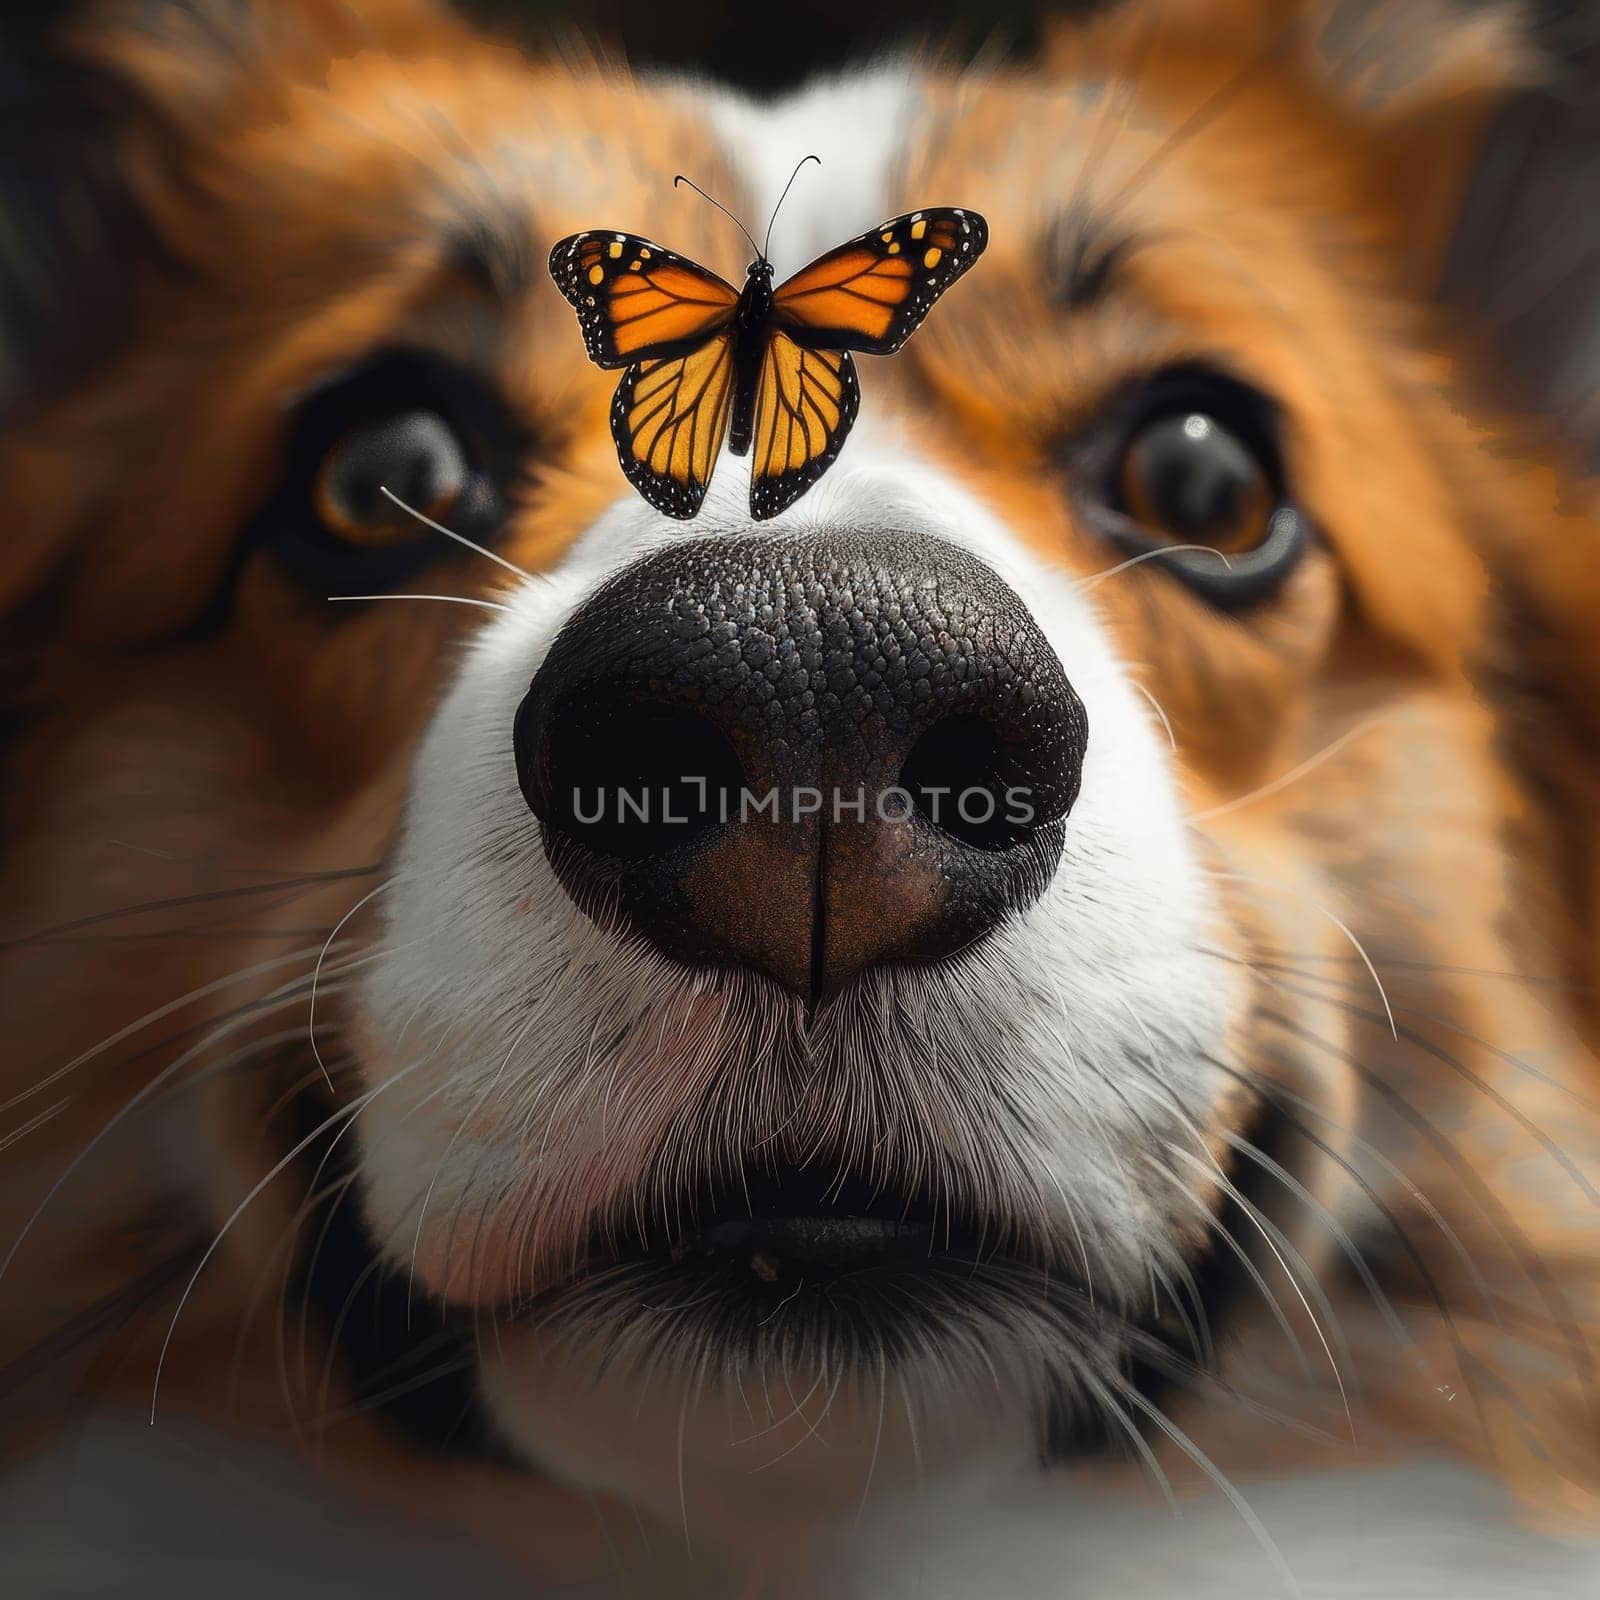 A painted lady butterfly sits gently on a corgi dog's snout, its intricate wings contrasting with the dog's soft fur. Both subjects are in sharp focus against a soft background.. by sfinks